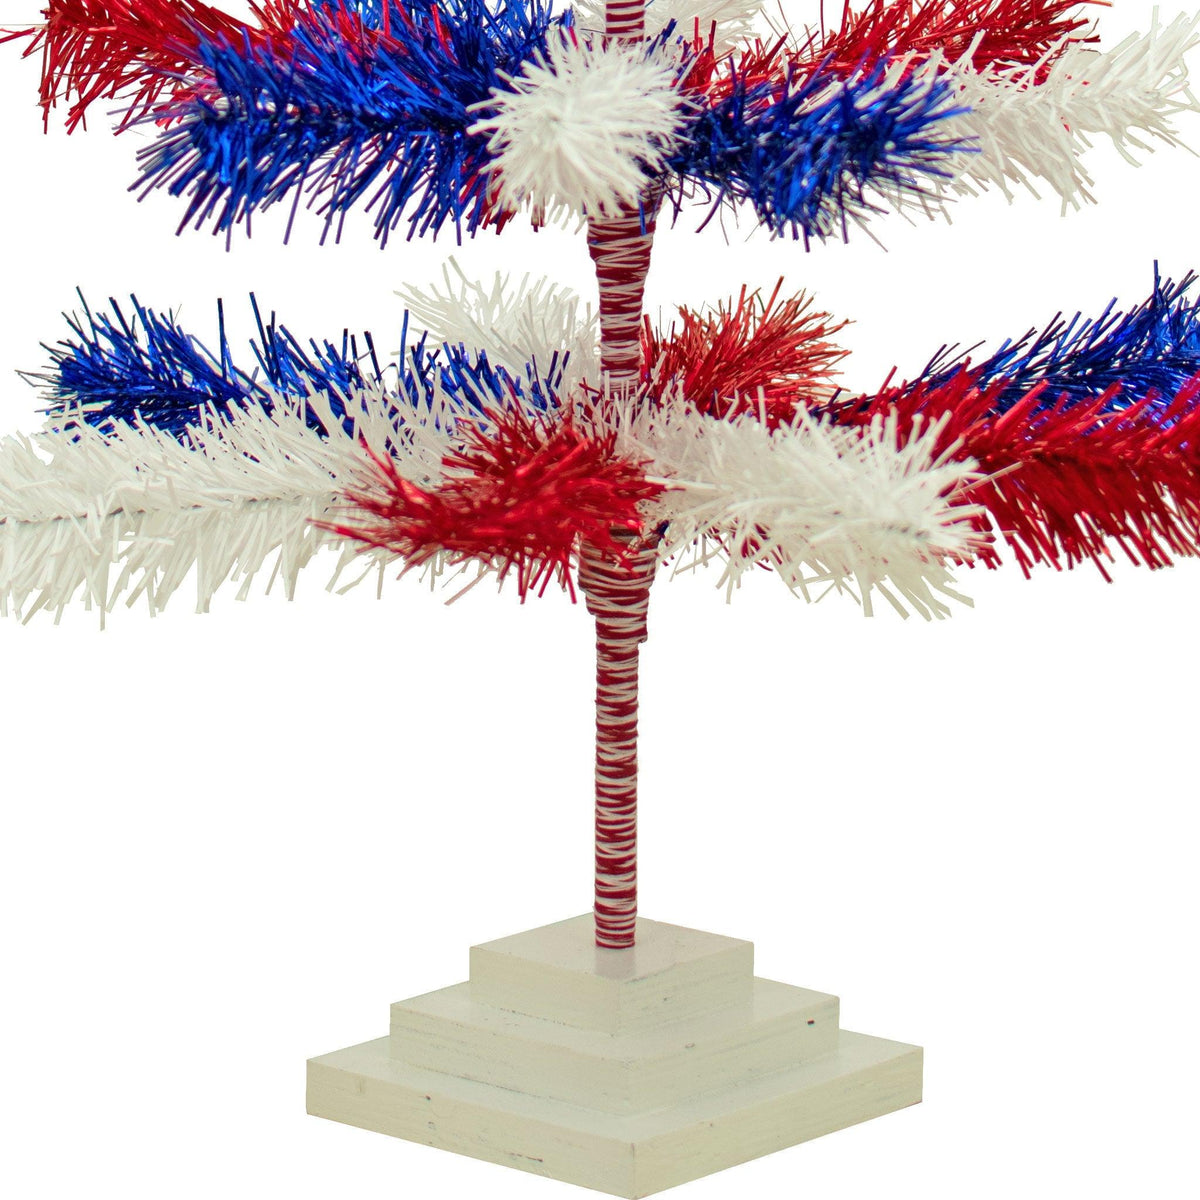 3FT Trees come with White tiered wooden bases.  36in Tall Red White and Blue Mixed Tinsel Christmas Tree on sale at leedisplay.com.